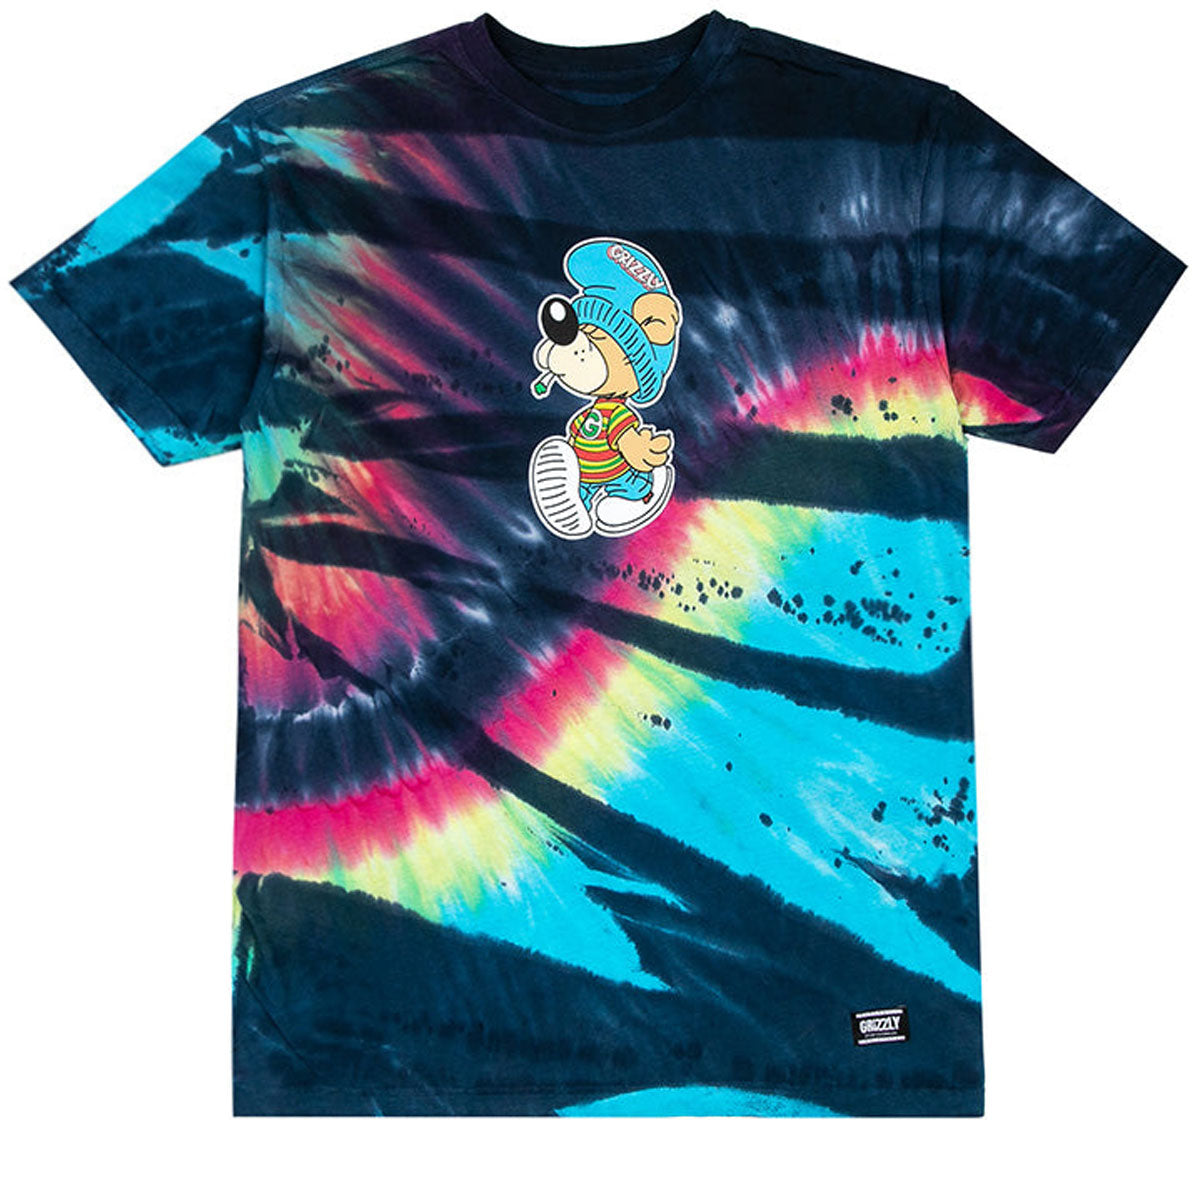 Grizzly Delinquent T-Shirt - Tie Dye image 1